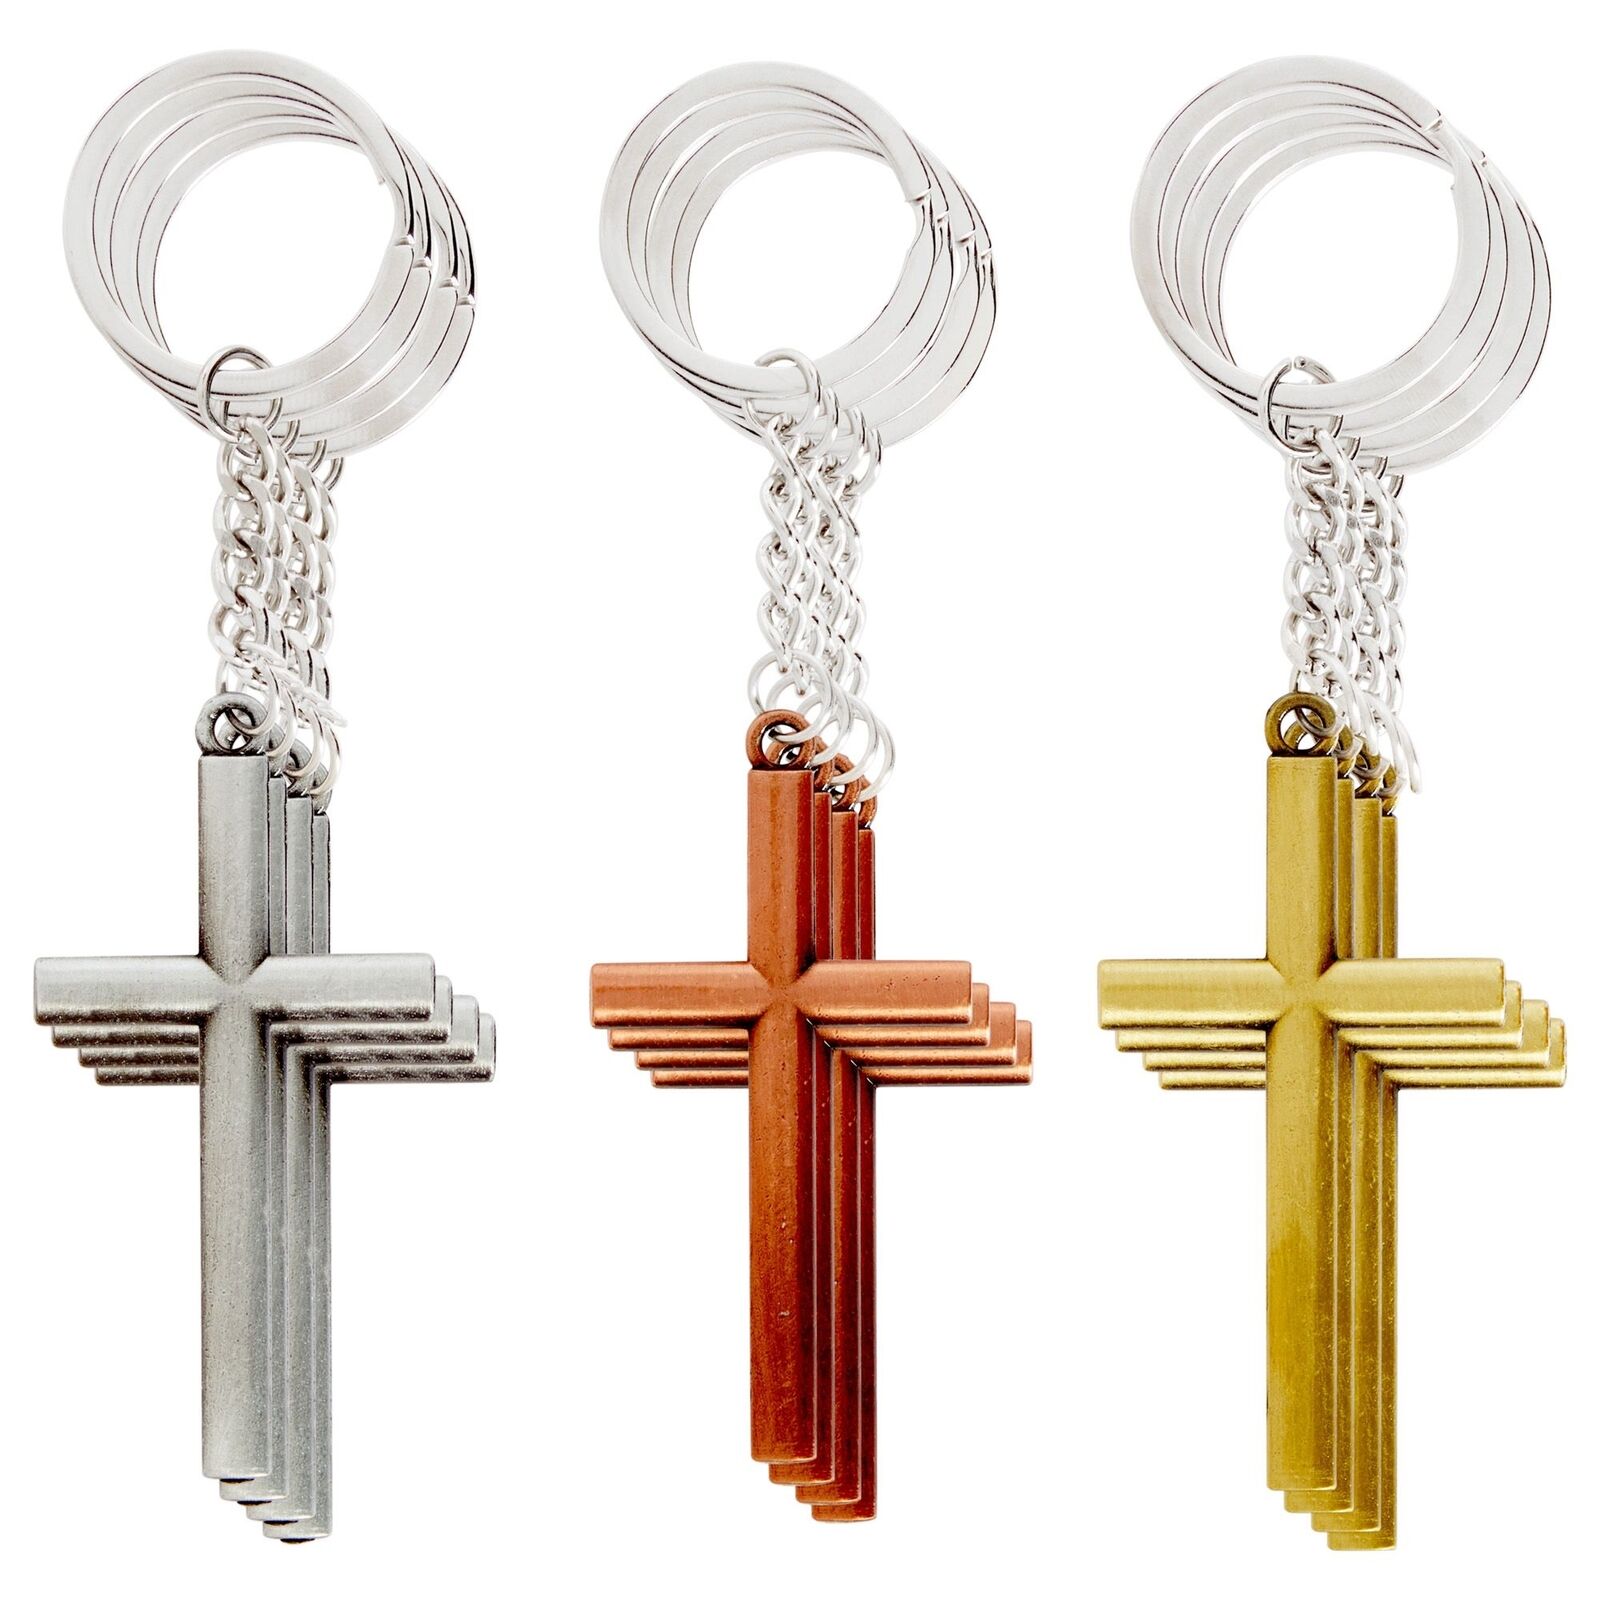 12 Pack Metal Cross Keychains, Jesus, Religious Key Rings, Silver, Copper, Gold